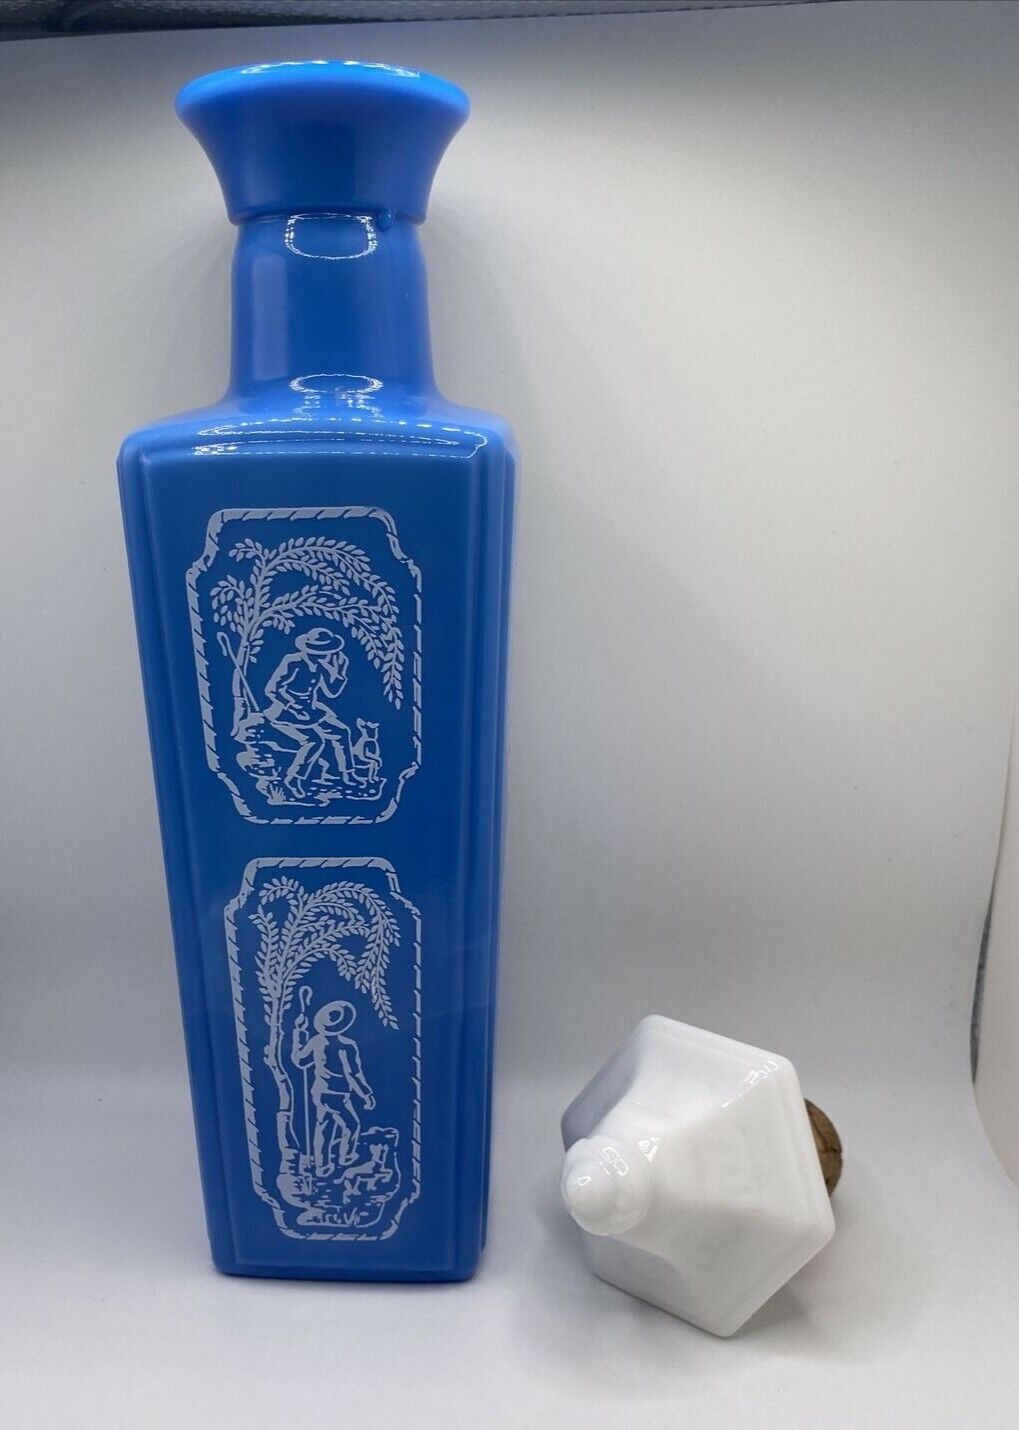 Vintage 1965 Jim Beam Blue and White Liquor Bottle with Lid and Original Cork. 